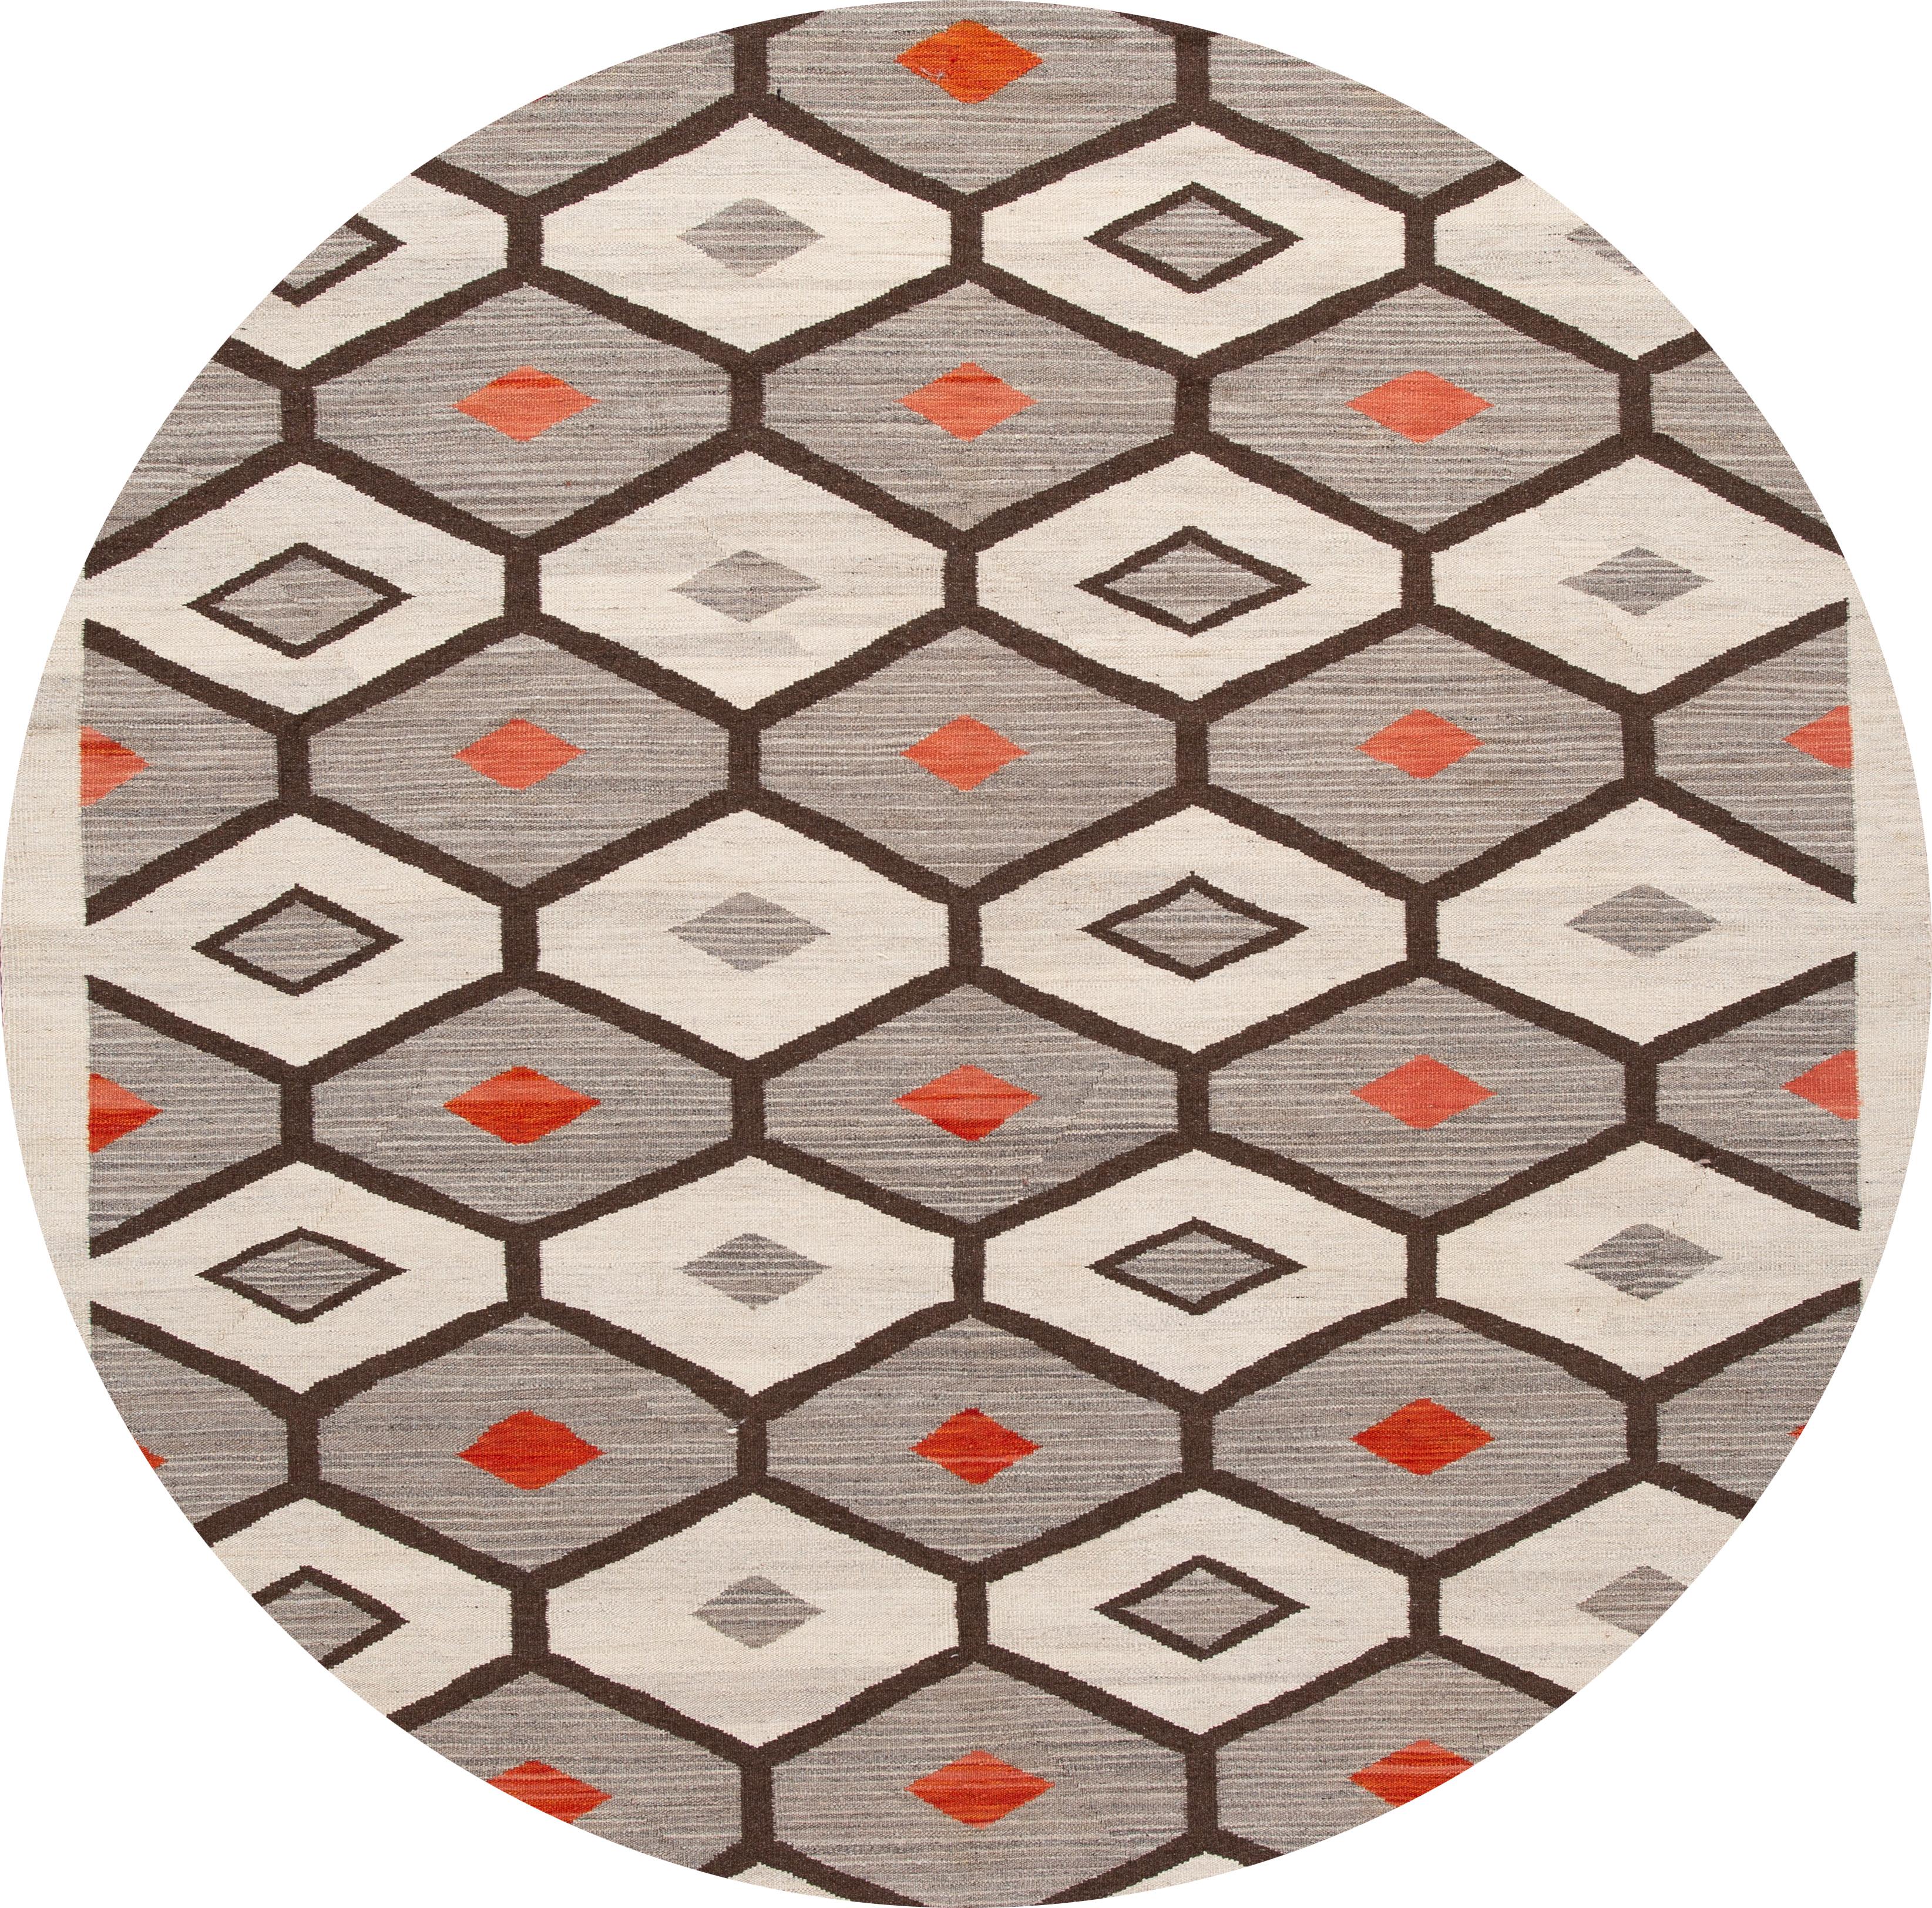 Beautiful contemporary flat-weave Navajo style, a handwoven wool rug with a gray field, ivory, and red accents in an all-over geometric design.

This rug measures 9' 9